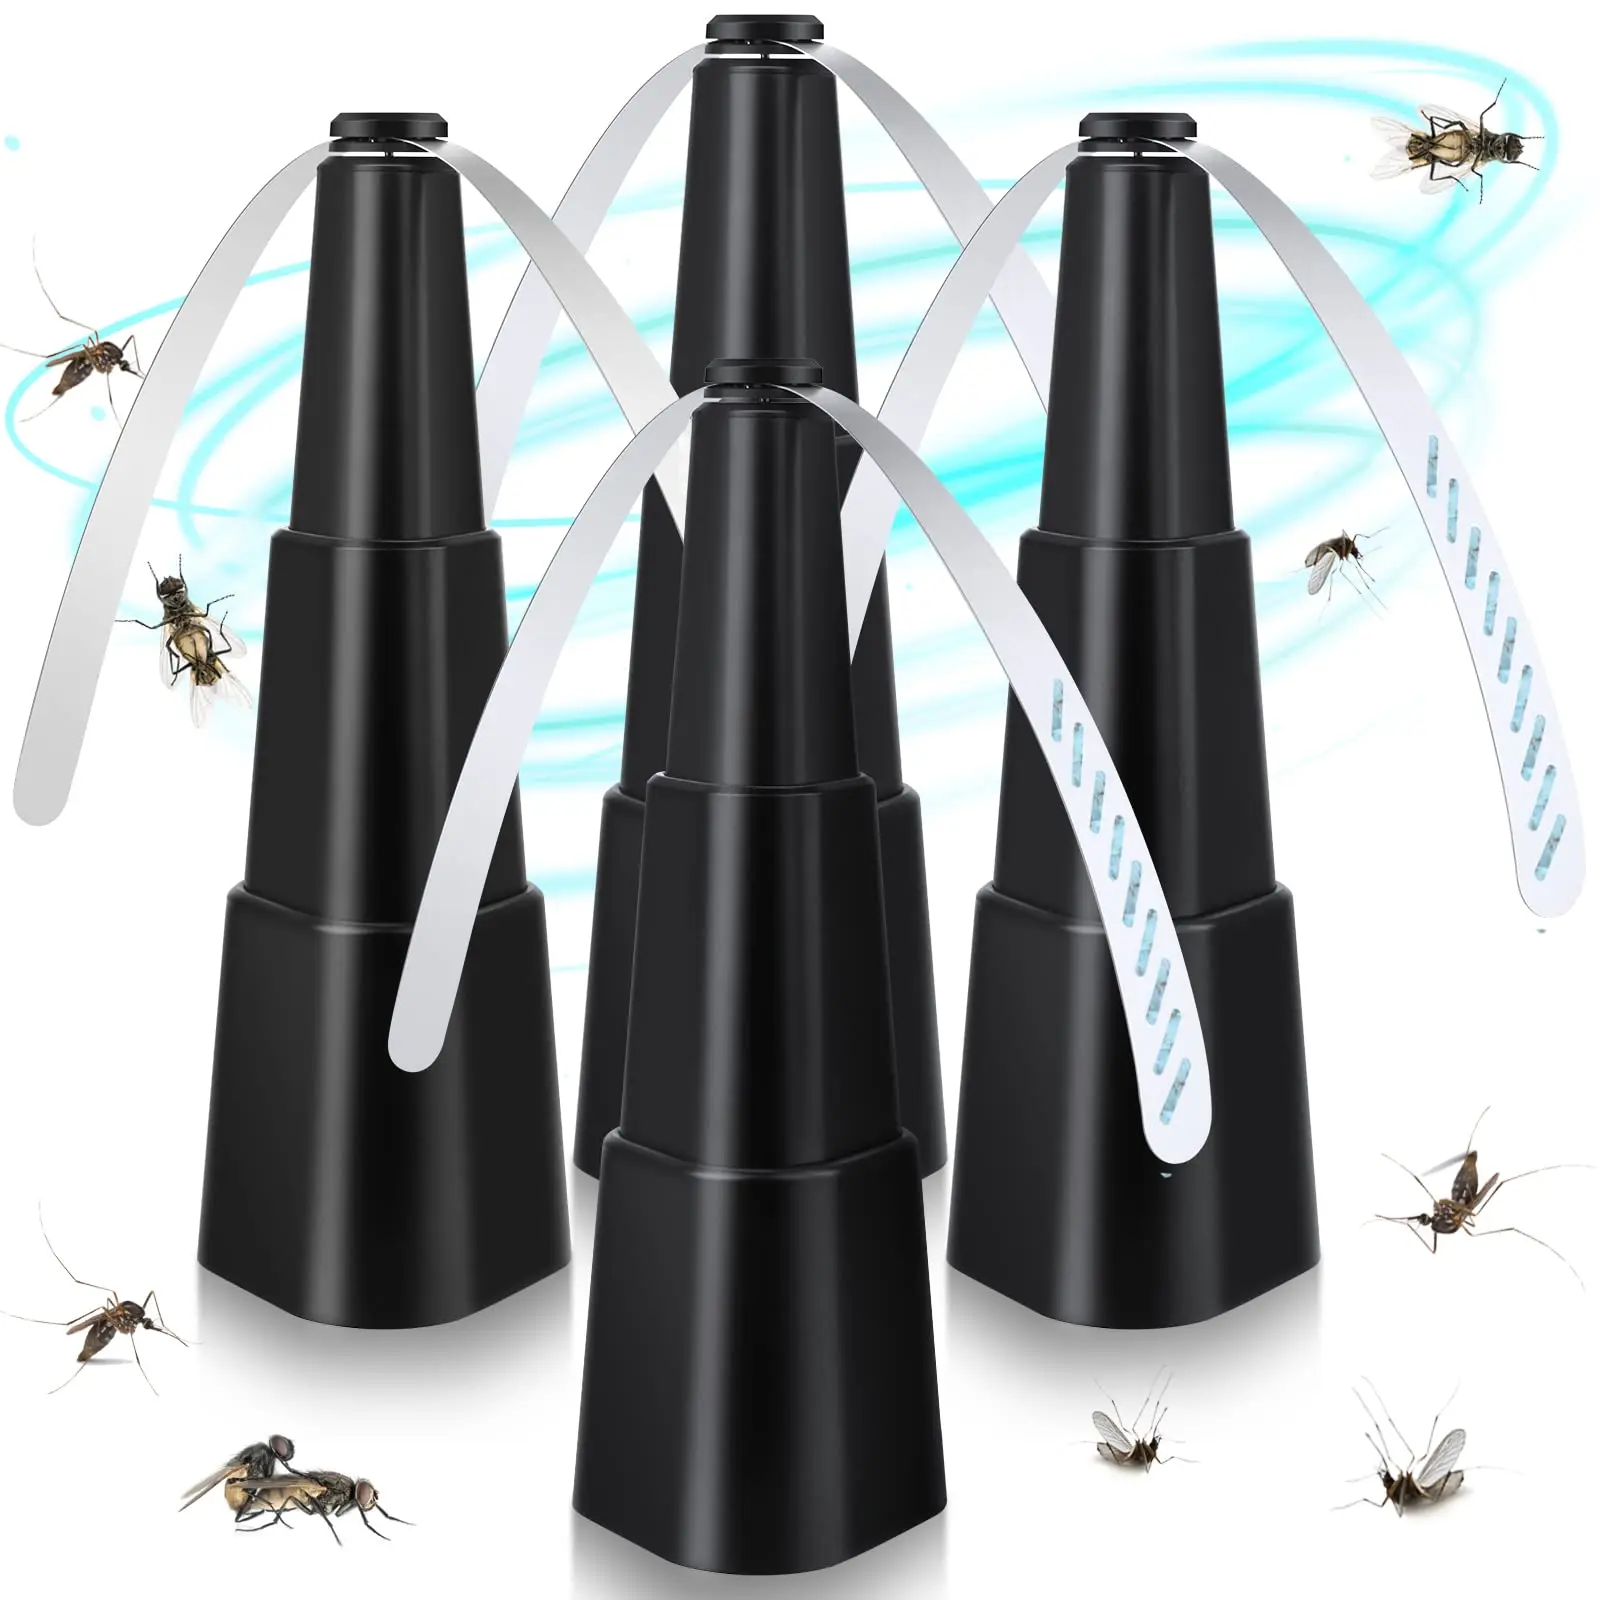 Fly Fans for Tables Fly Repellent Fan Indoor Outdoor with Holographic Blades Keep Flies Away Bug Repellent Outdoor mosquitoes insect killer fly repellent fan keep flies and bugs away from food enjoy outdoor meal mosquito trap